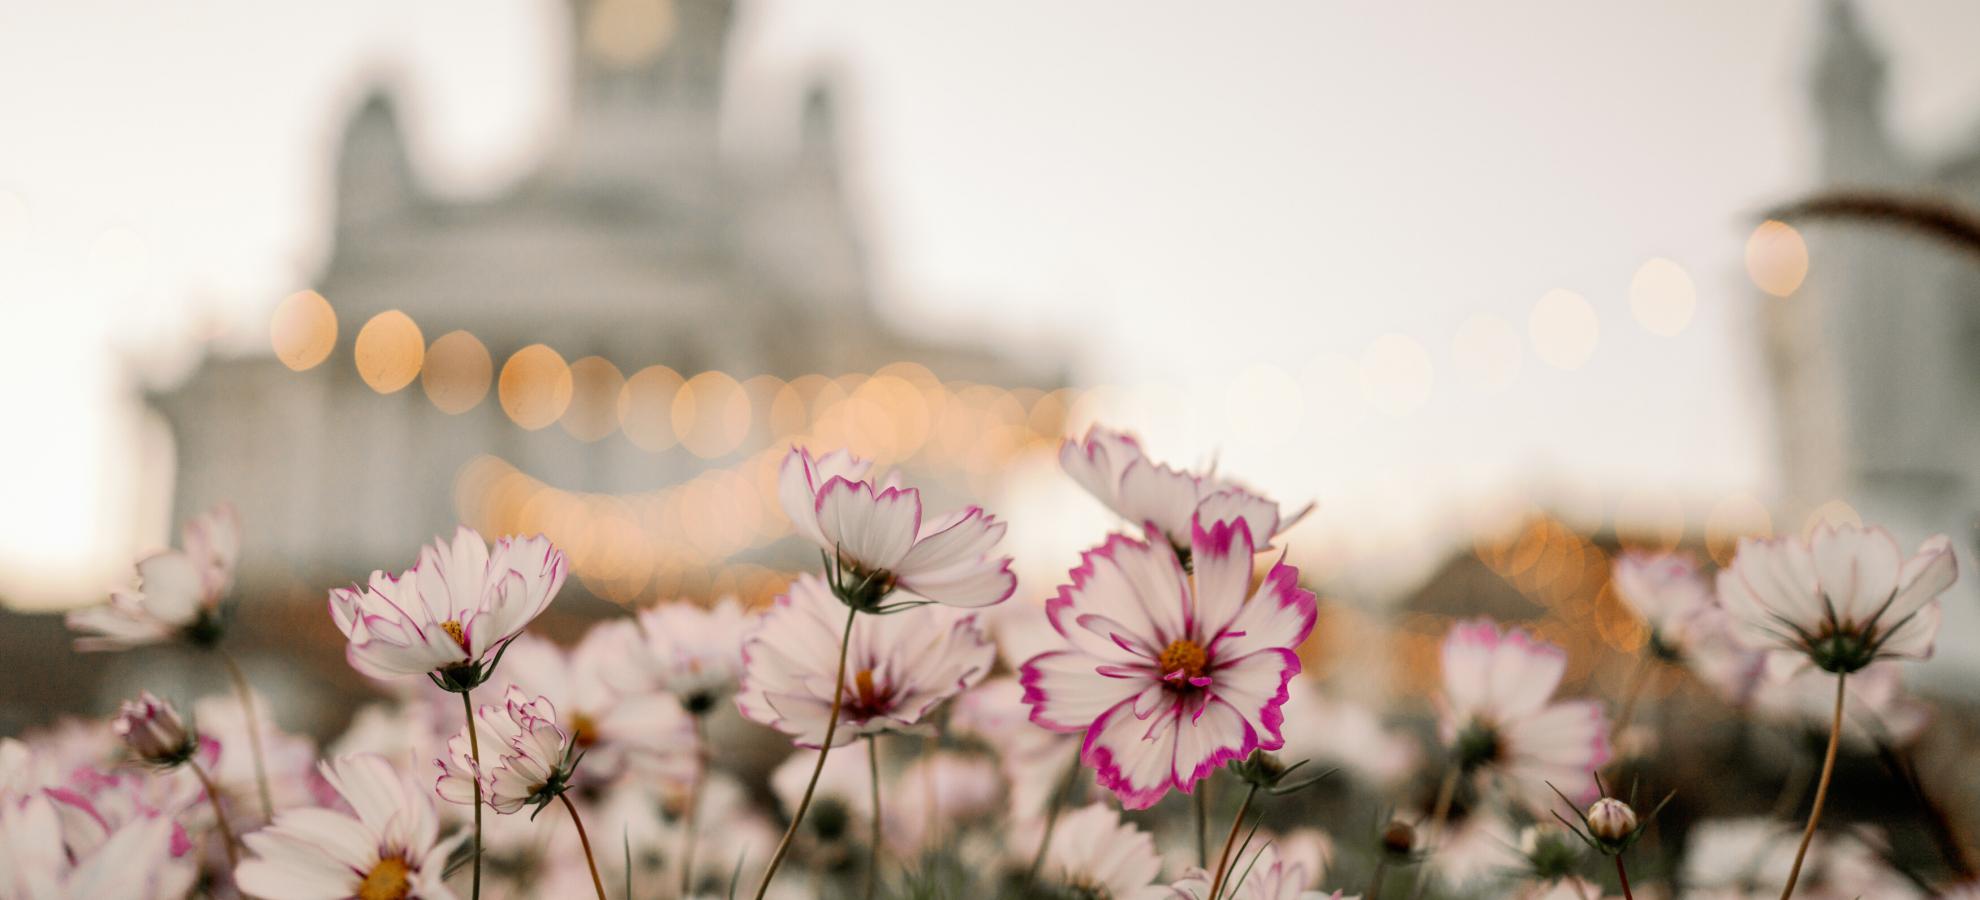 Close up of pink and white flowers, with the Helsinki Cathedral blurred in the background.